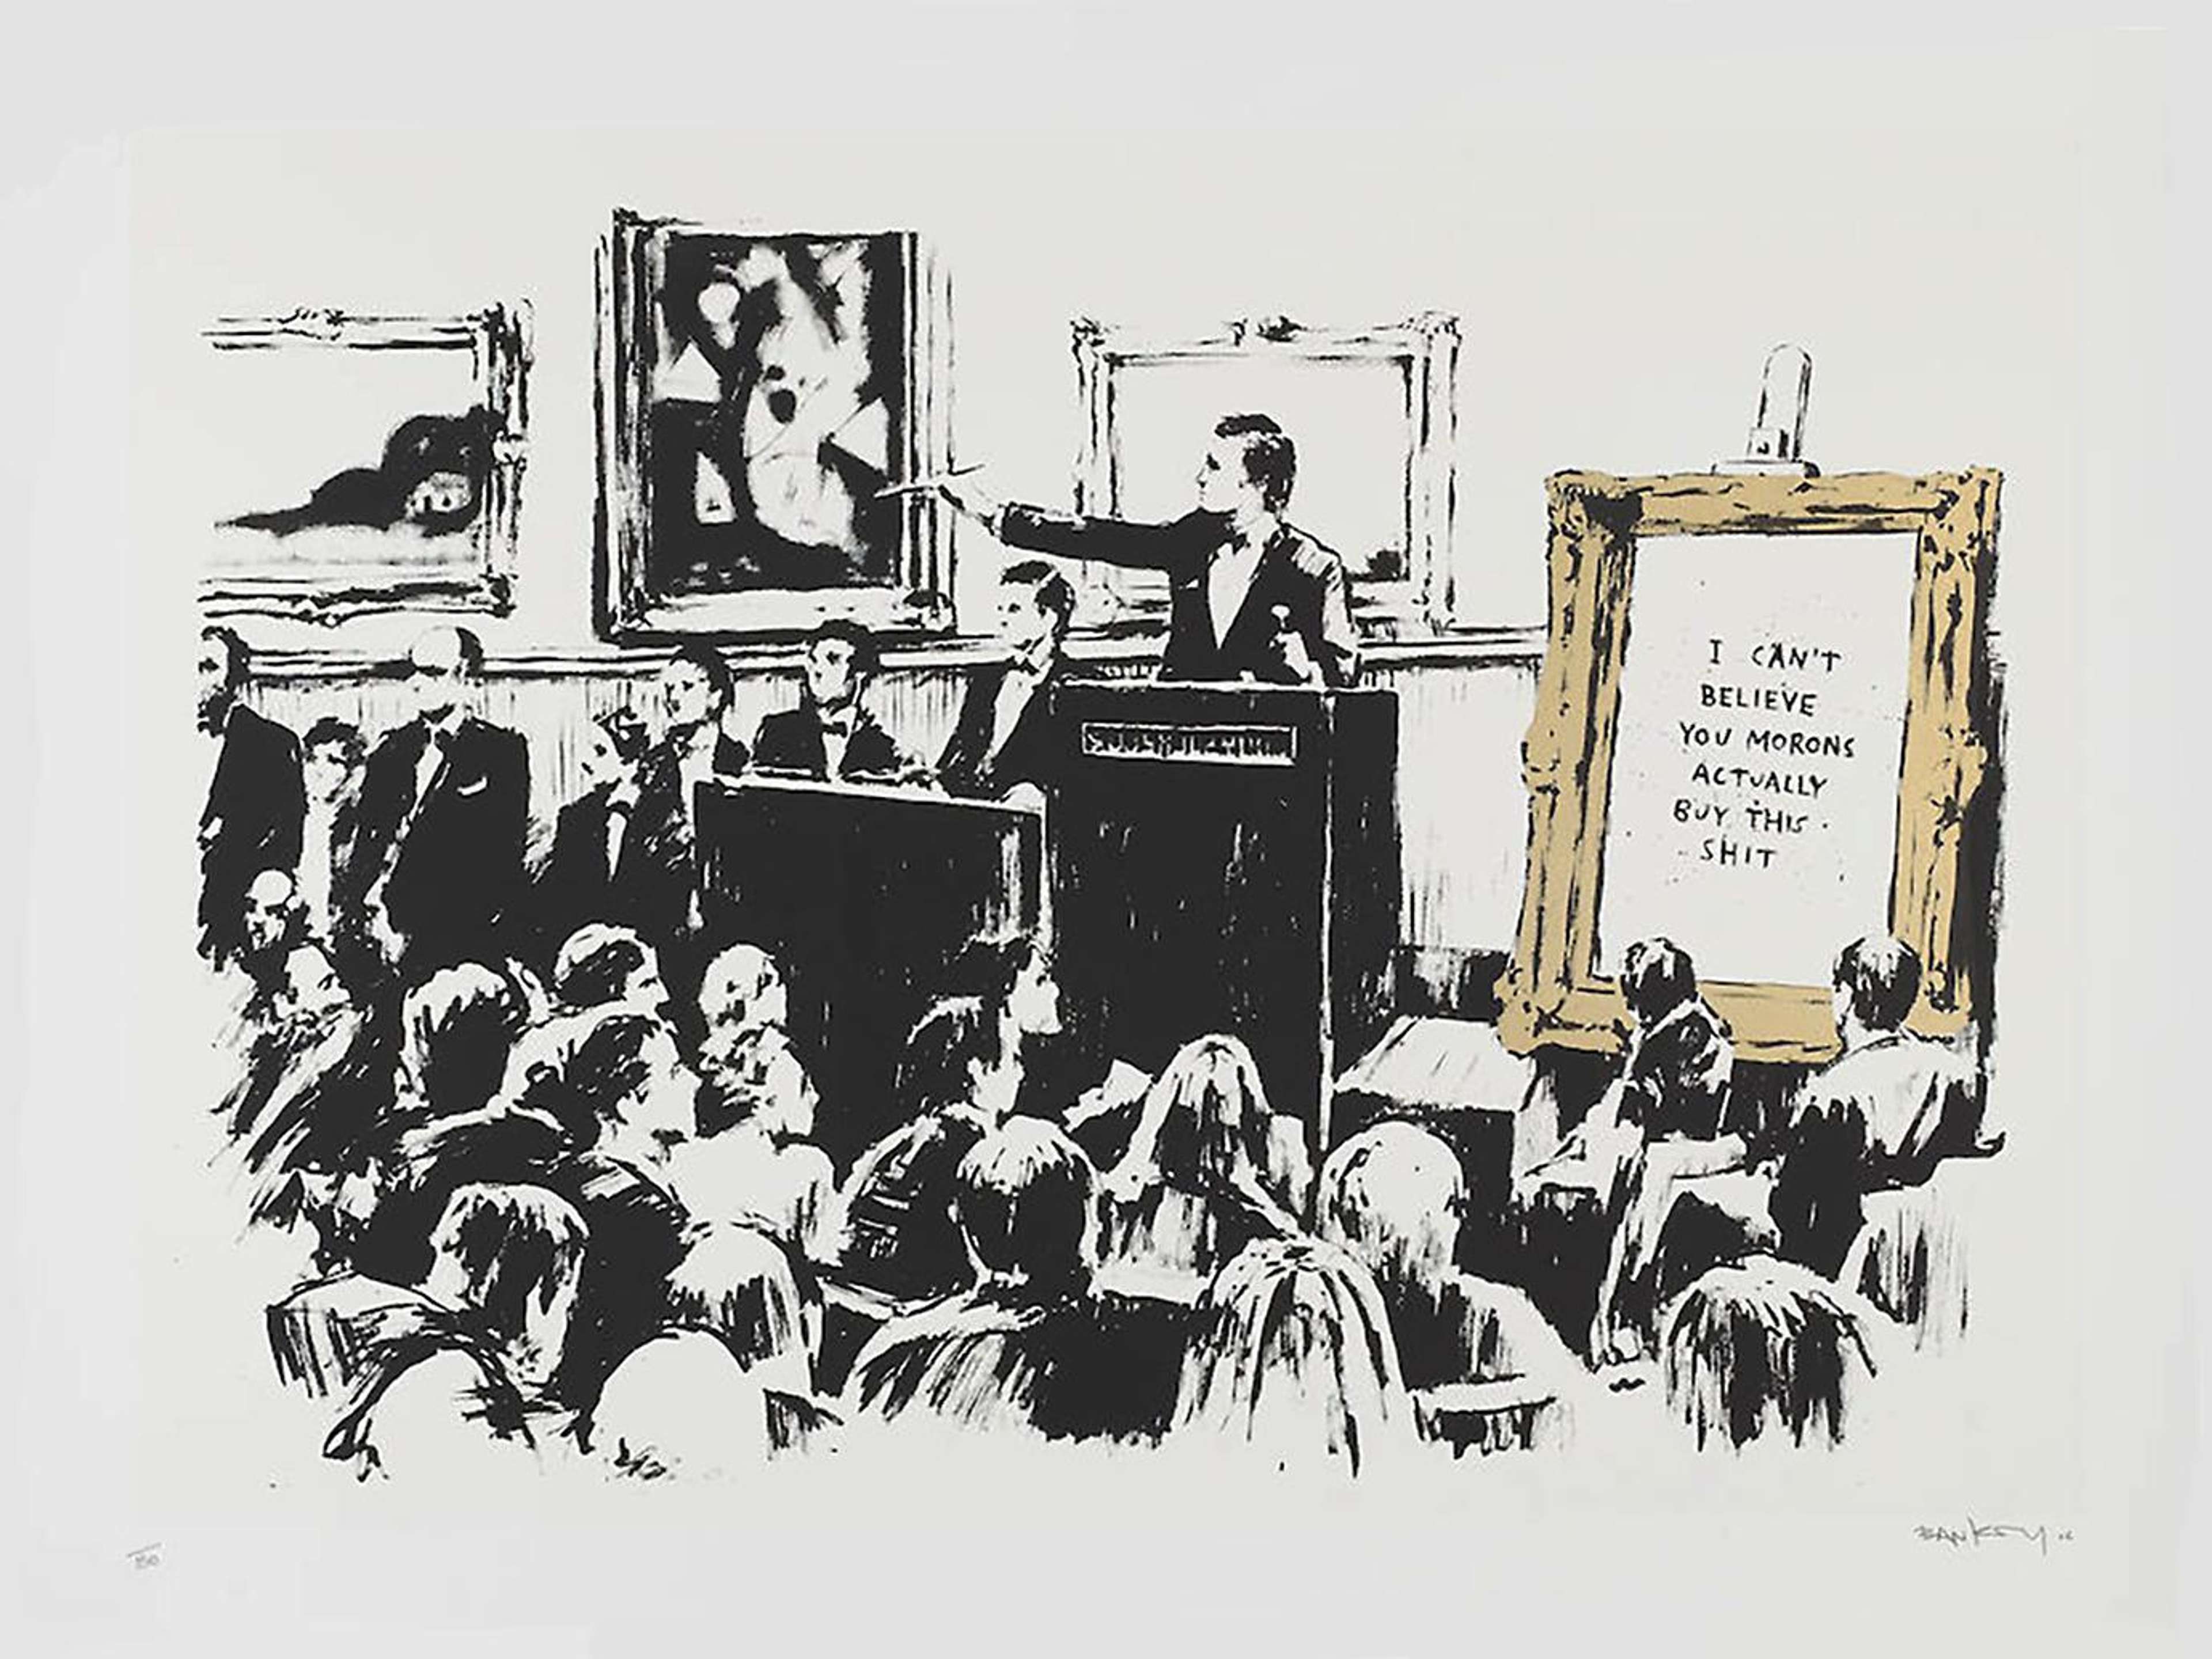 A screenprint by Banksy depicting an auction room in black and white ink, replacing Van Gogh's Sunflowers, sold for £22.5m, with a gold framed sign reading "I CAN'T 